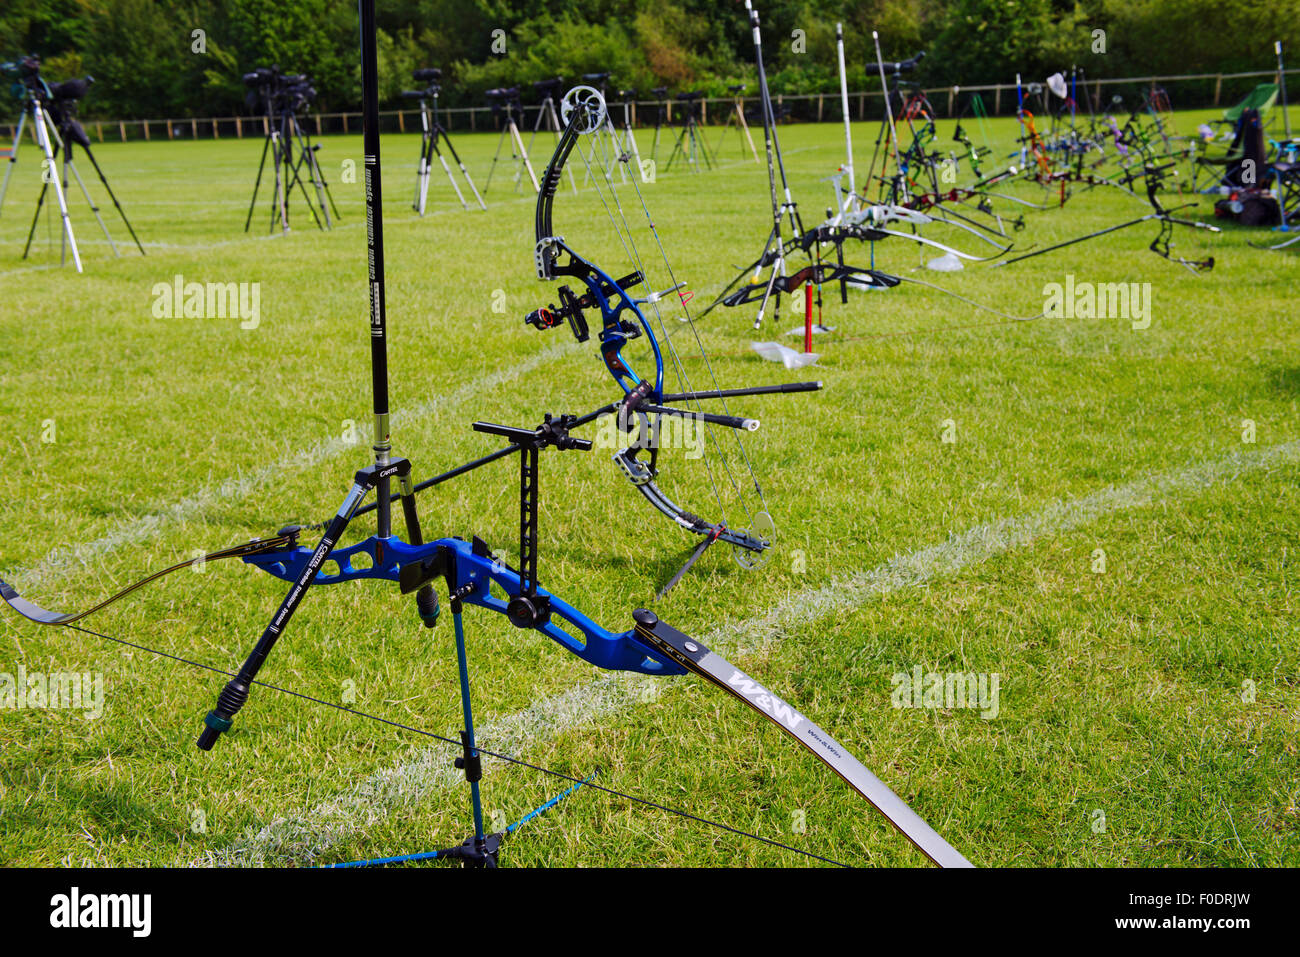 Archery competition, row of bows of variety of modern styles (compound and recurve) lined up behind shooting line Stock Photo